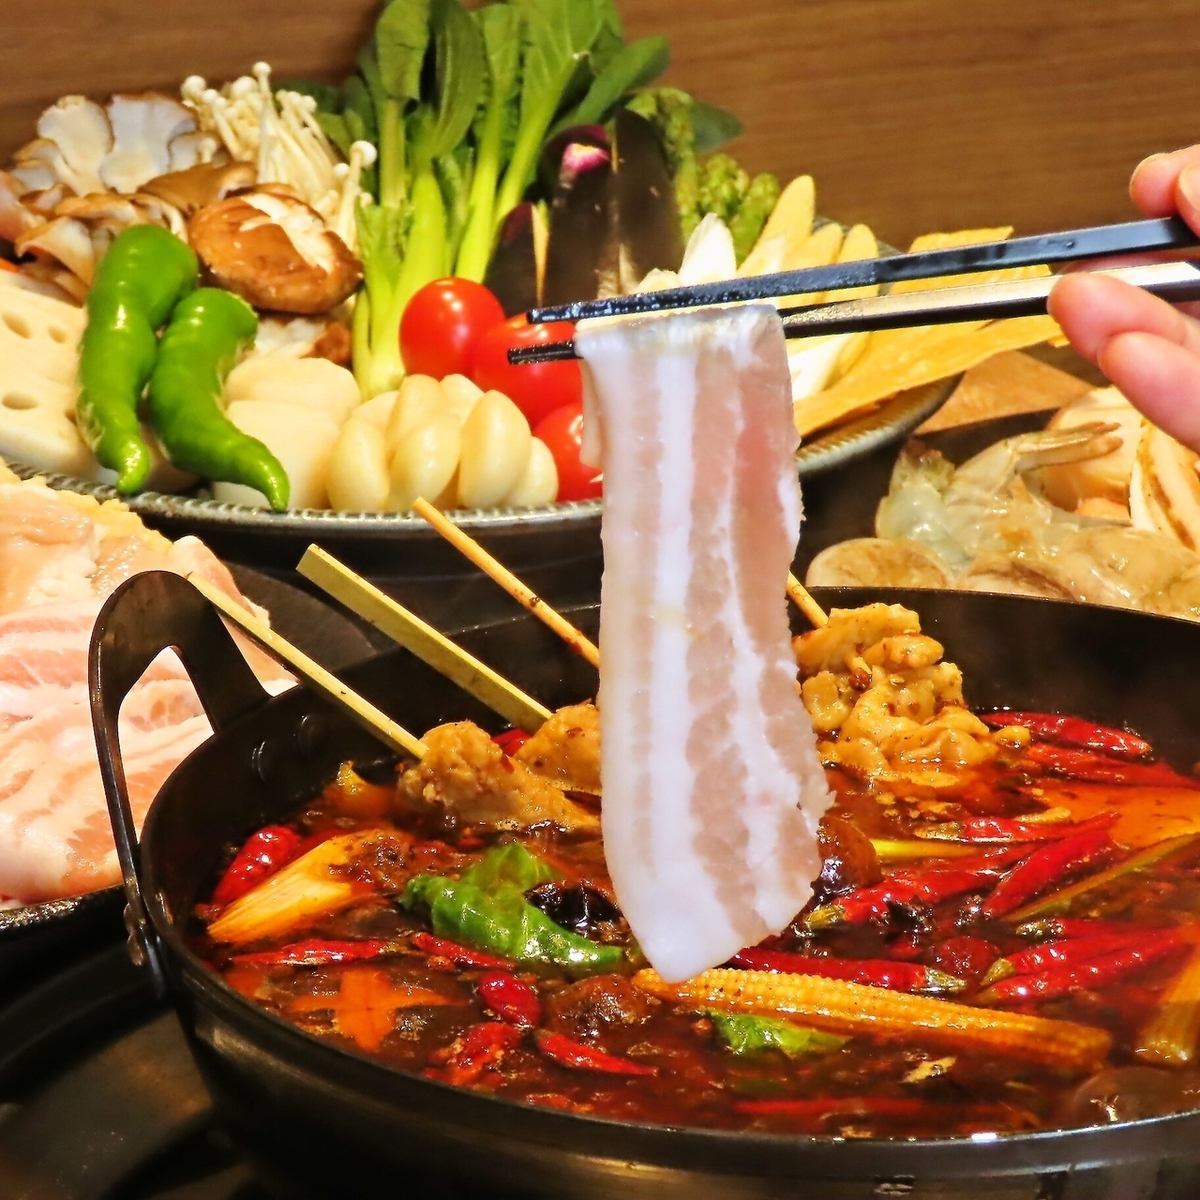 Enjoy spicy hot pot full of spices♪